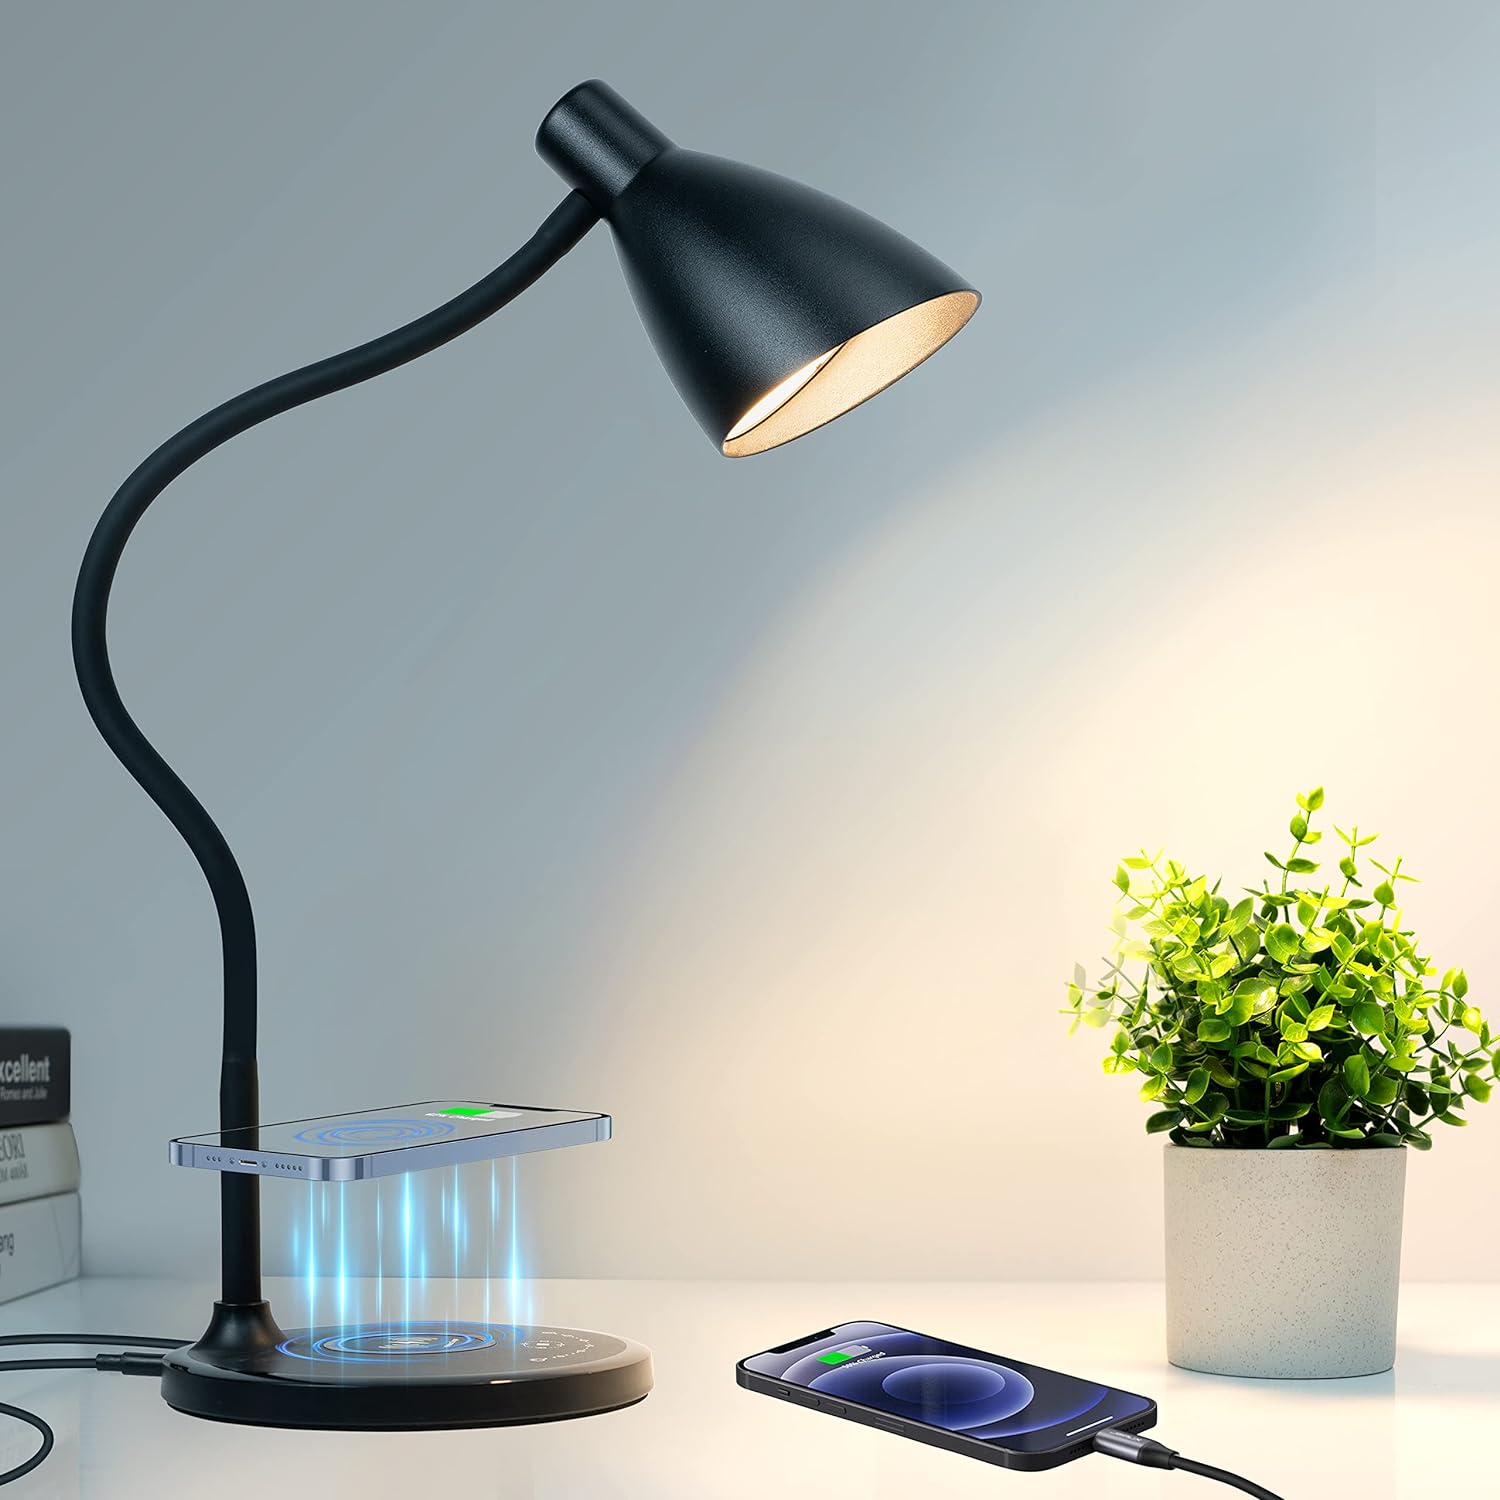 What an impressive number of features included in this desk lamp. The levels of brightness and the shades of brightness along with a built-in charging station for your cellphone makes this lamp a welcome addition to anyone' reading environment.